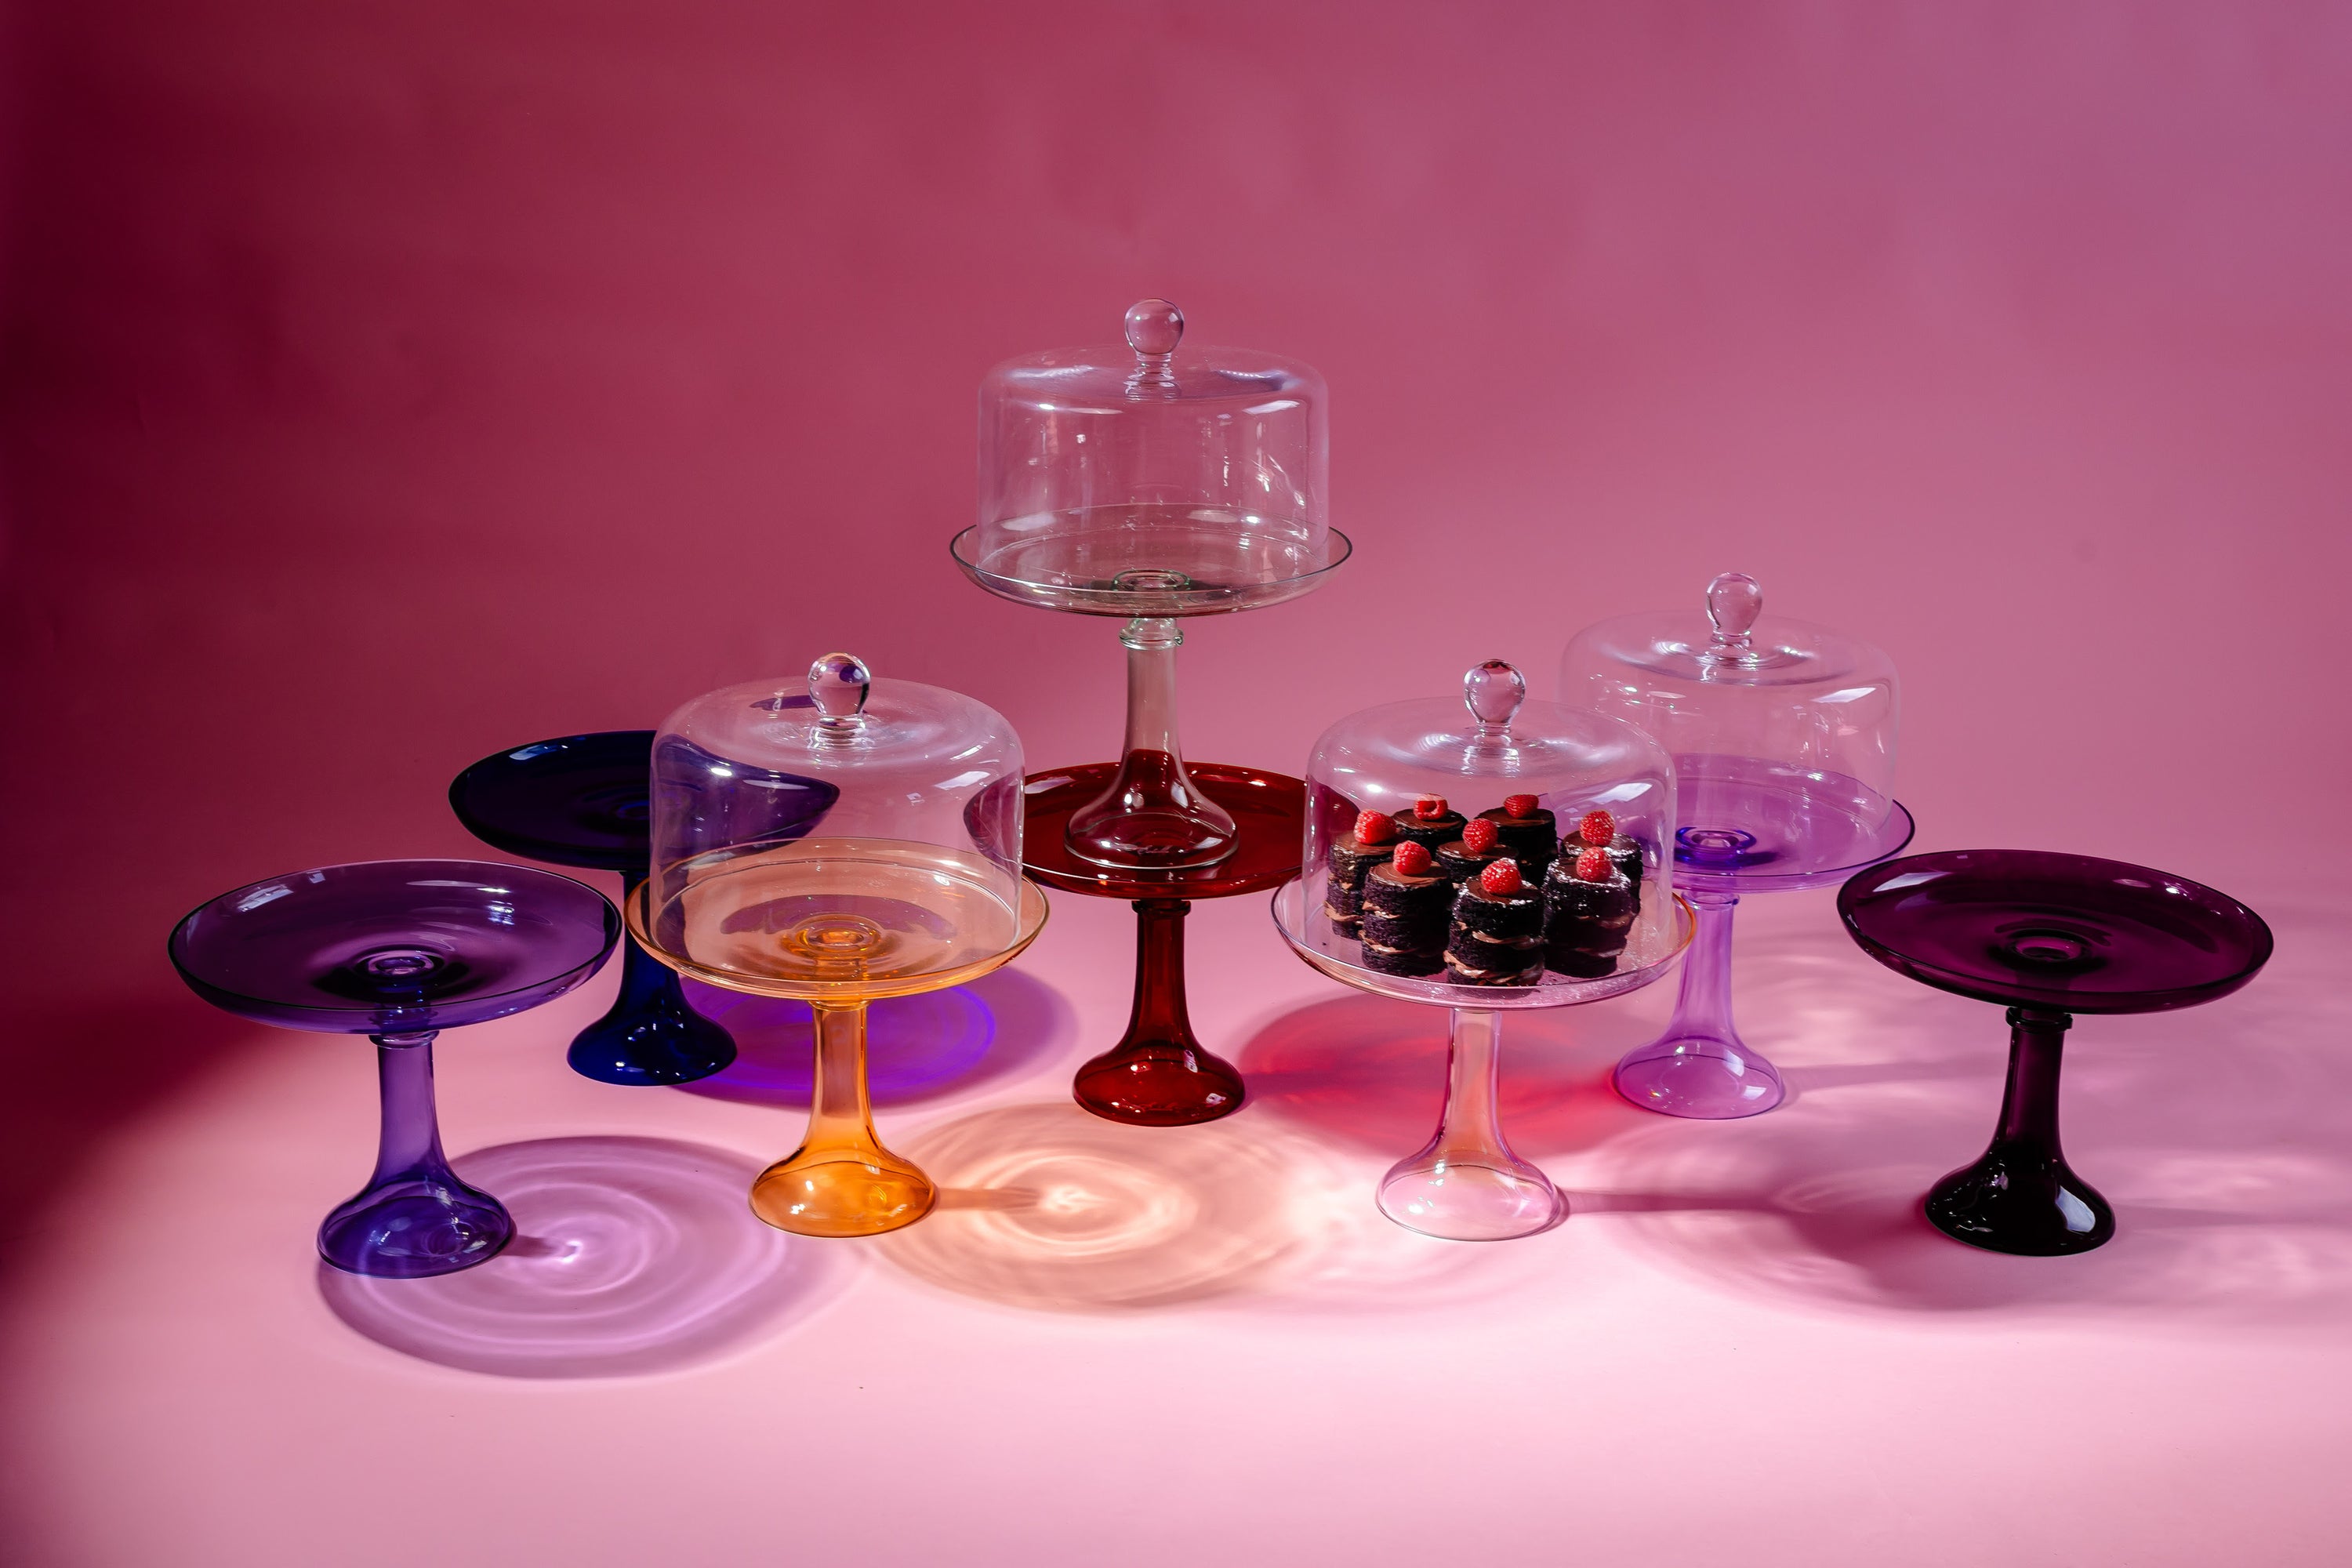 Make Your Desserts Dazzle with Estelle's Colored Cake Stands